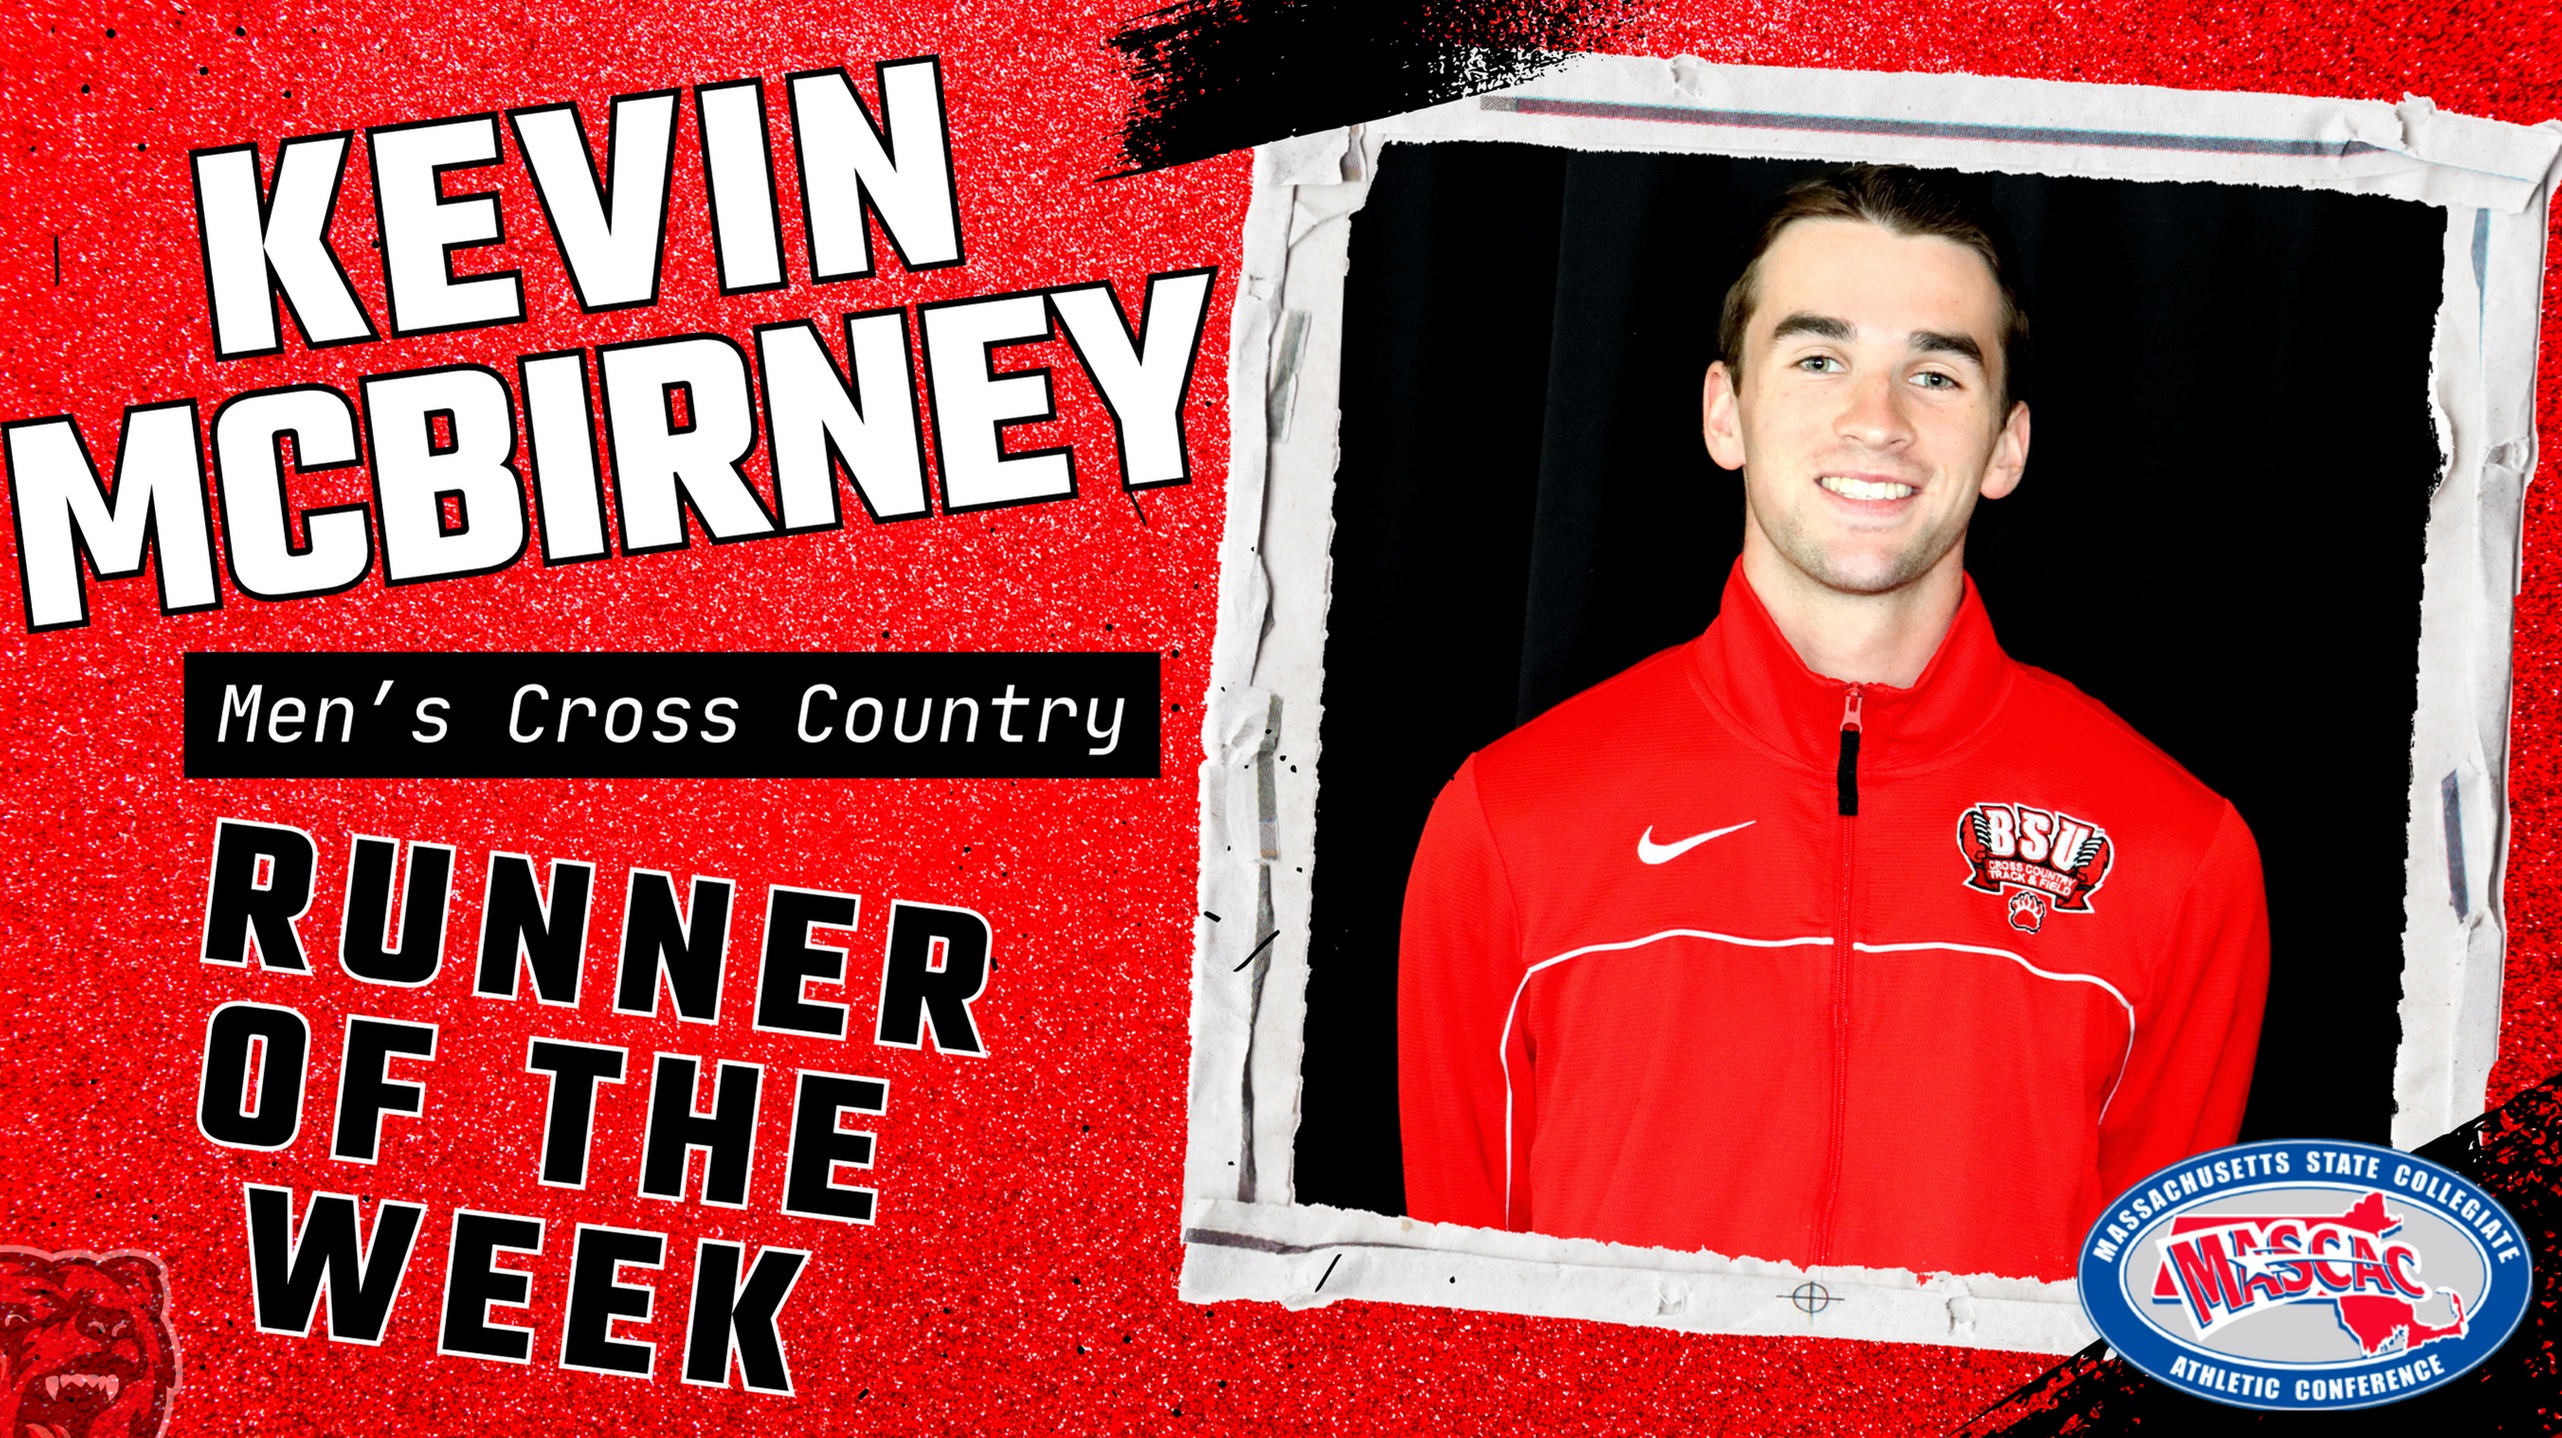 Kevin McBirney Named MASCAC Men's Cross Country Runner of the Week